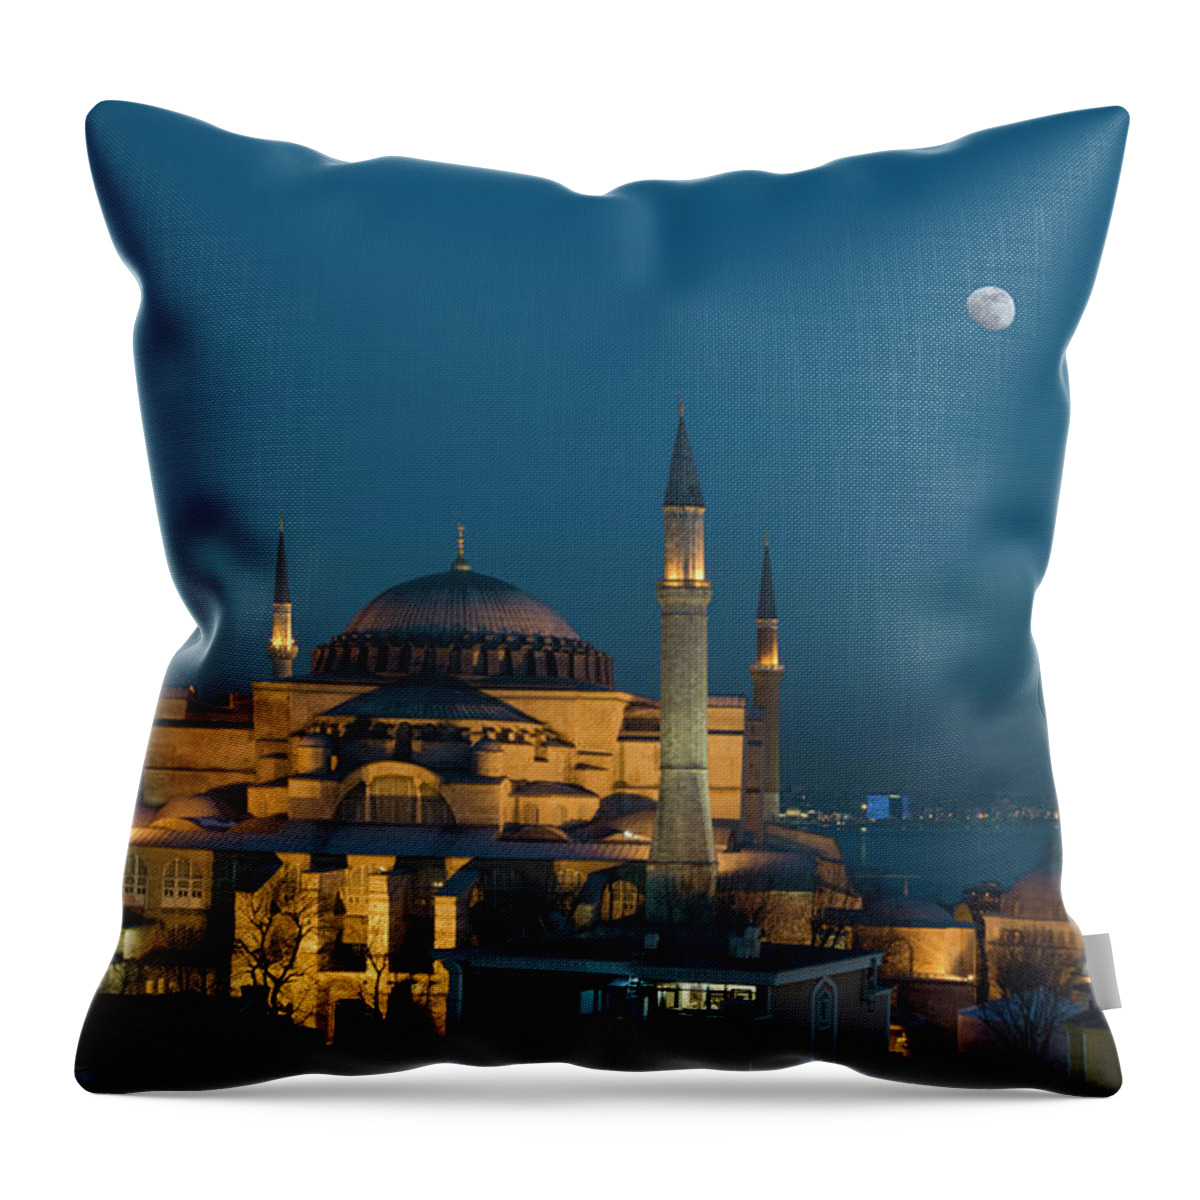 Istanbul Throw Pillow featuring the photograph Hagia Sophia Museum by Ayhan Altun